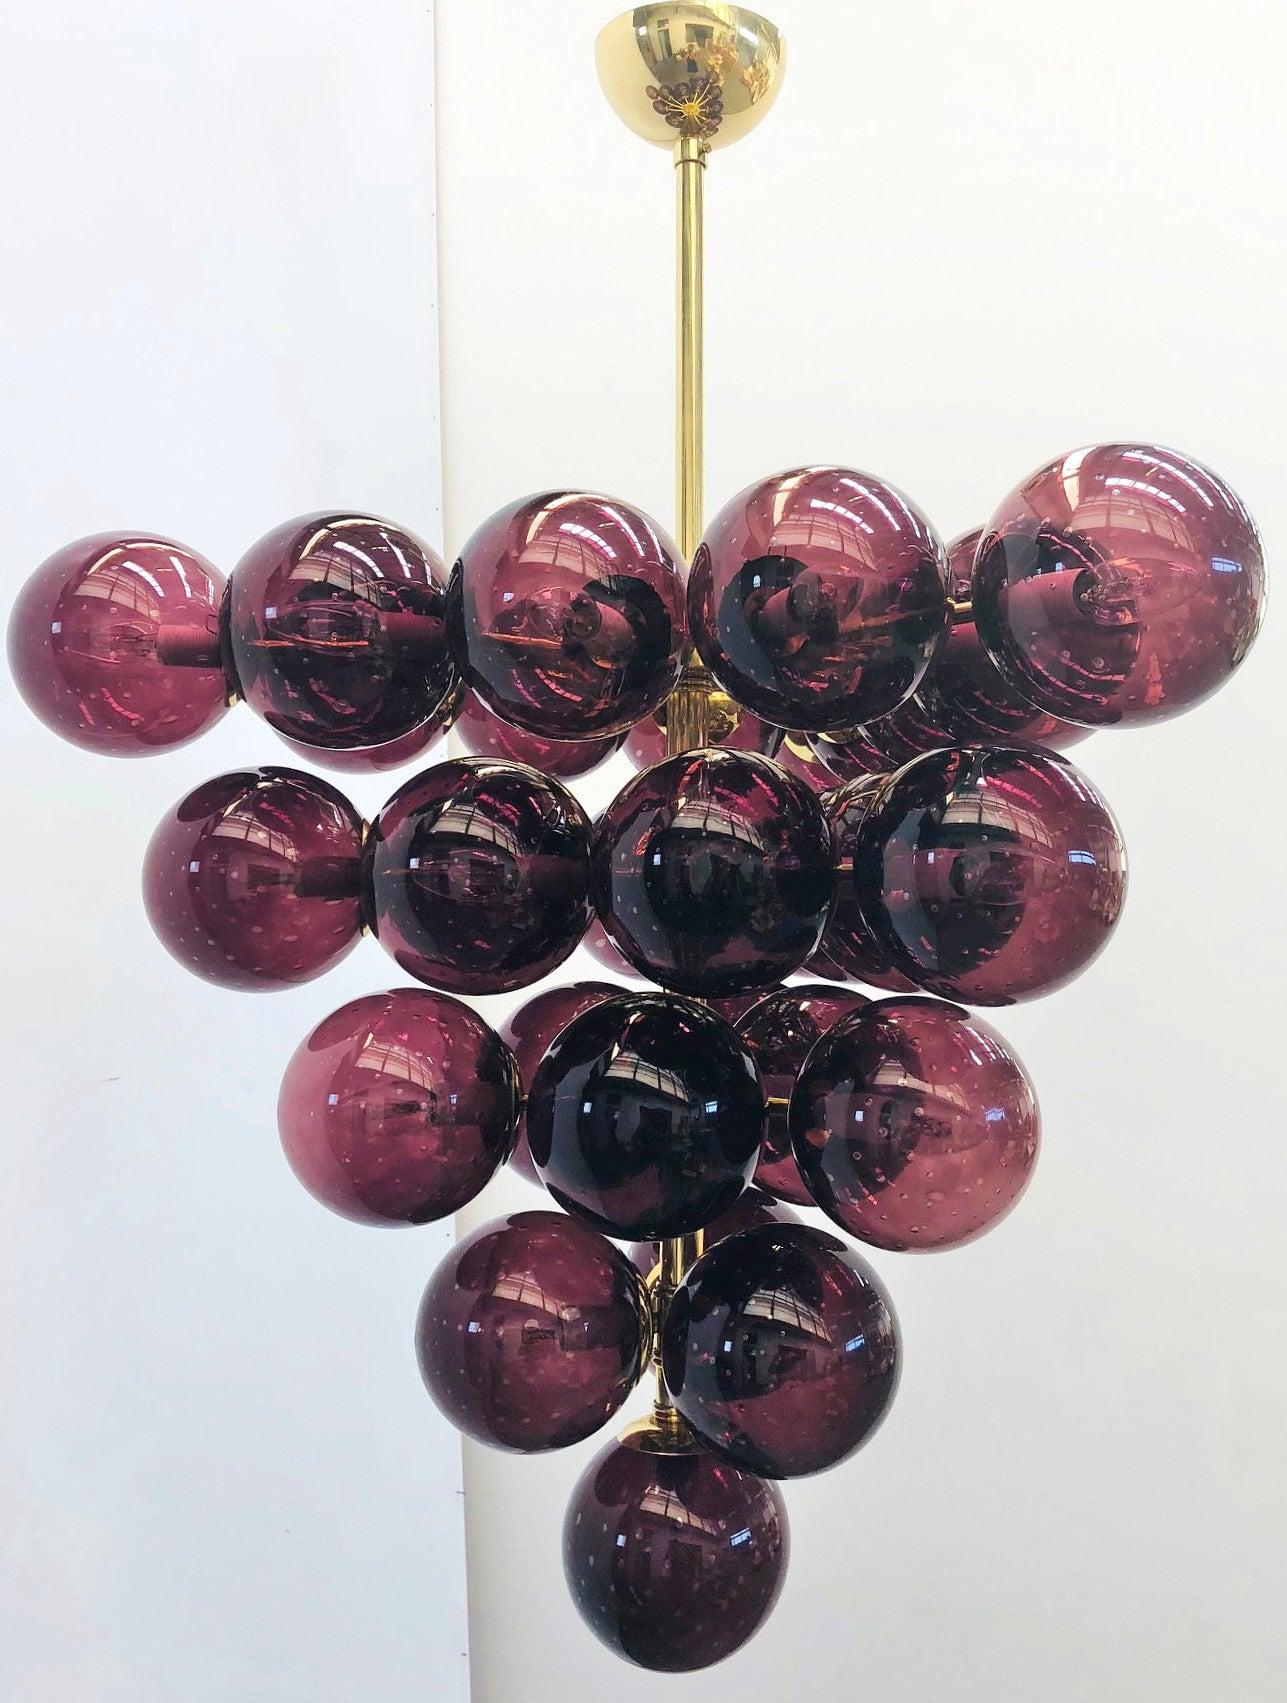 Italian chandelier with Amethyst Murano glass globes hand blown with bubbles inside the glass using Bollicine technique, mounted on polished brass frame / Designed by Fabio Bergomi for Fabio Ltd / Made in Italy
31-light / E12 or E14 type / max 40W